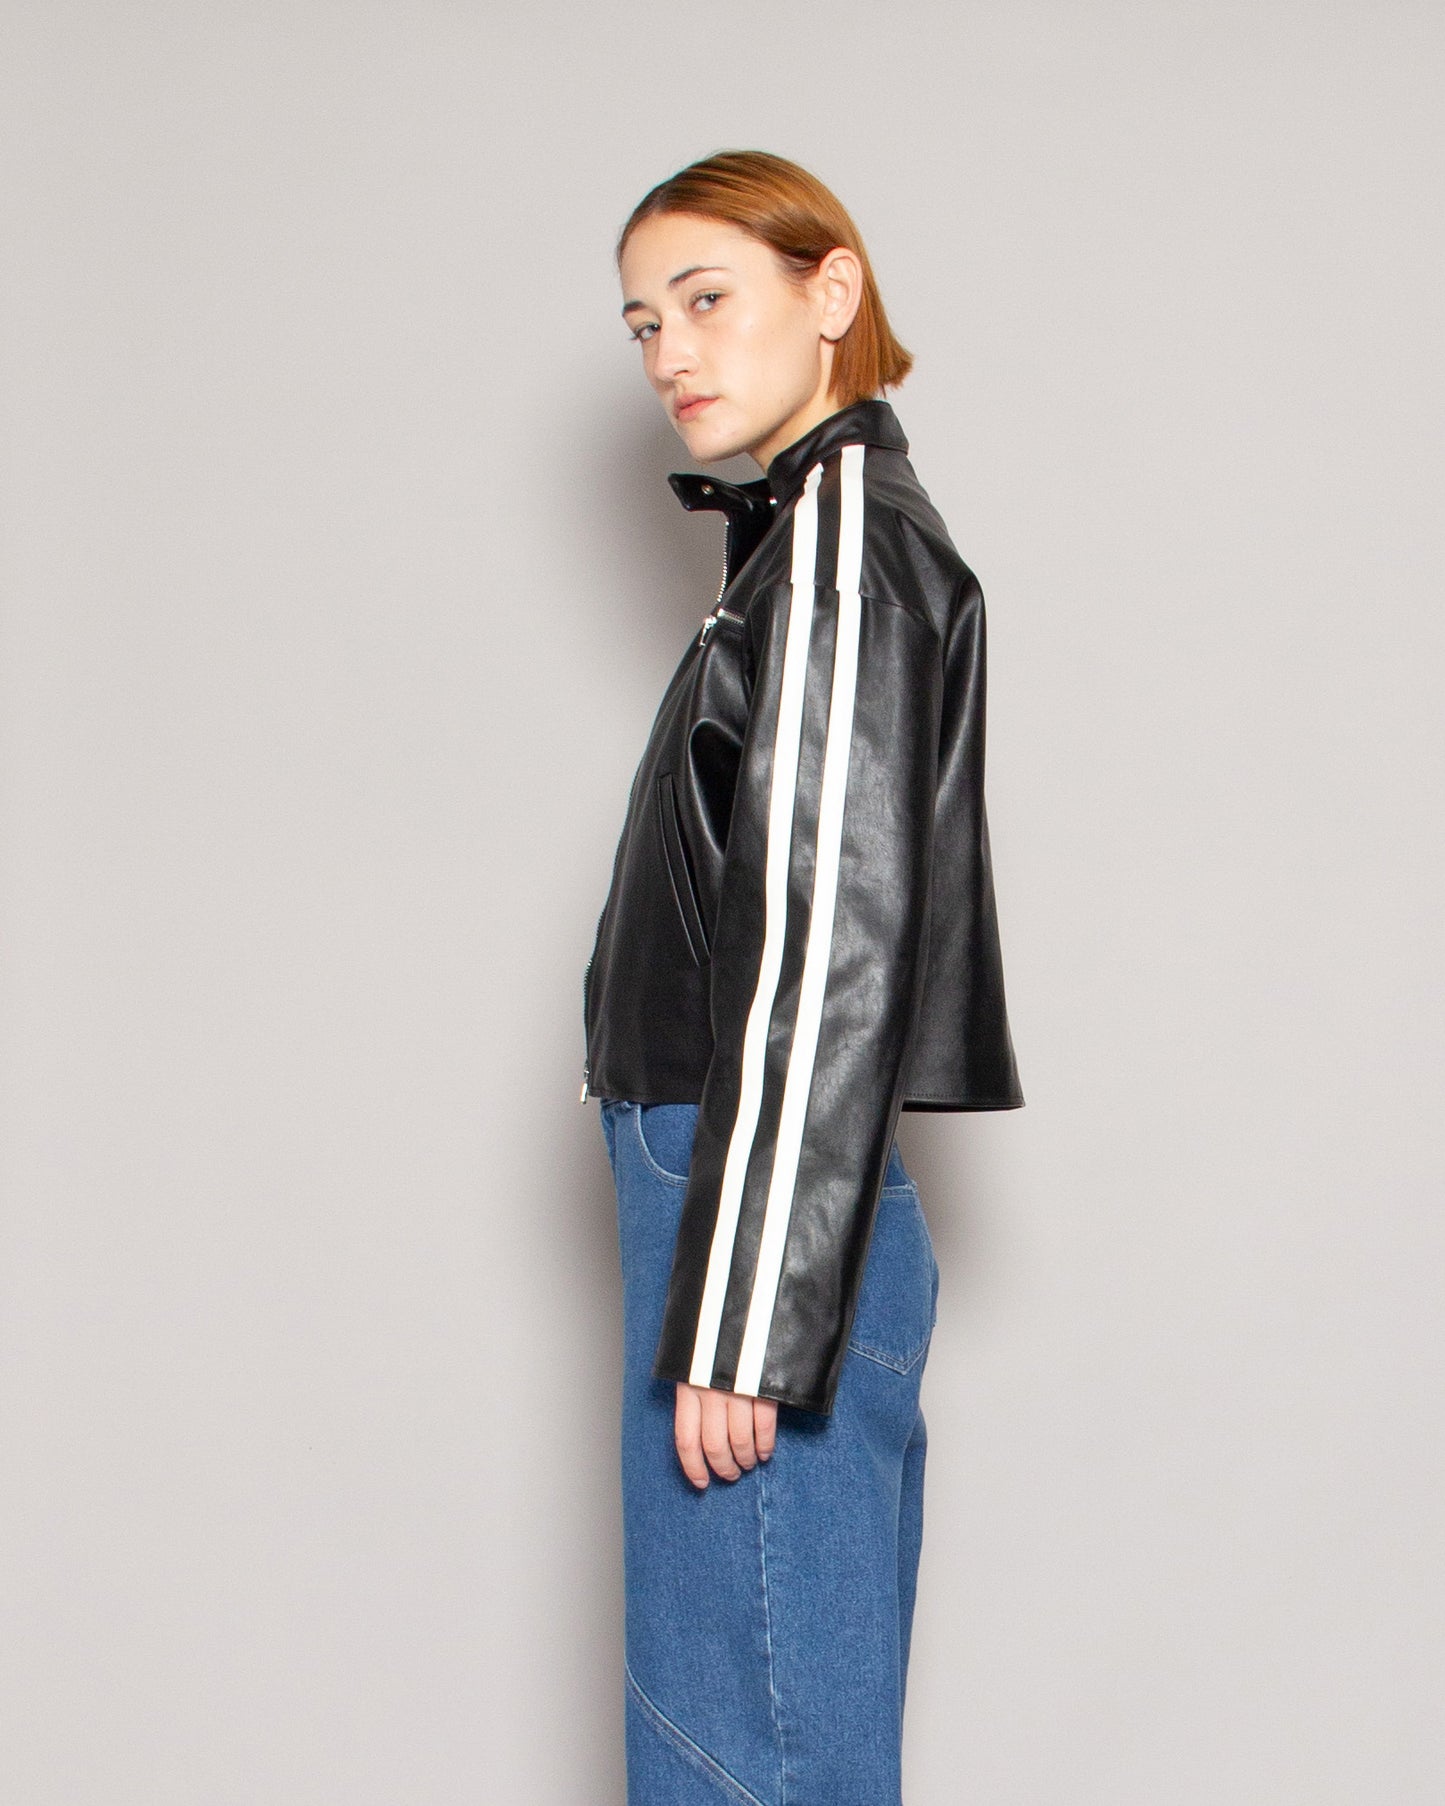 NOMIA Cropped Moto Racing Jacket in Black/White available at Lahn.shop